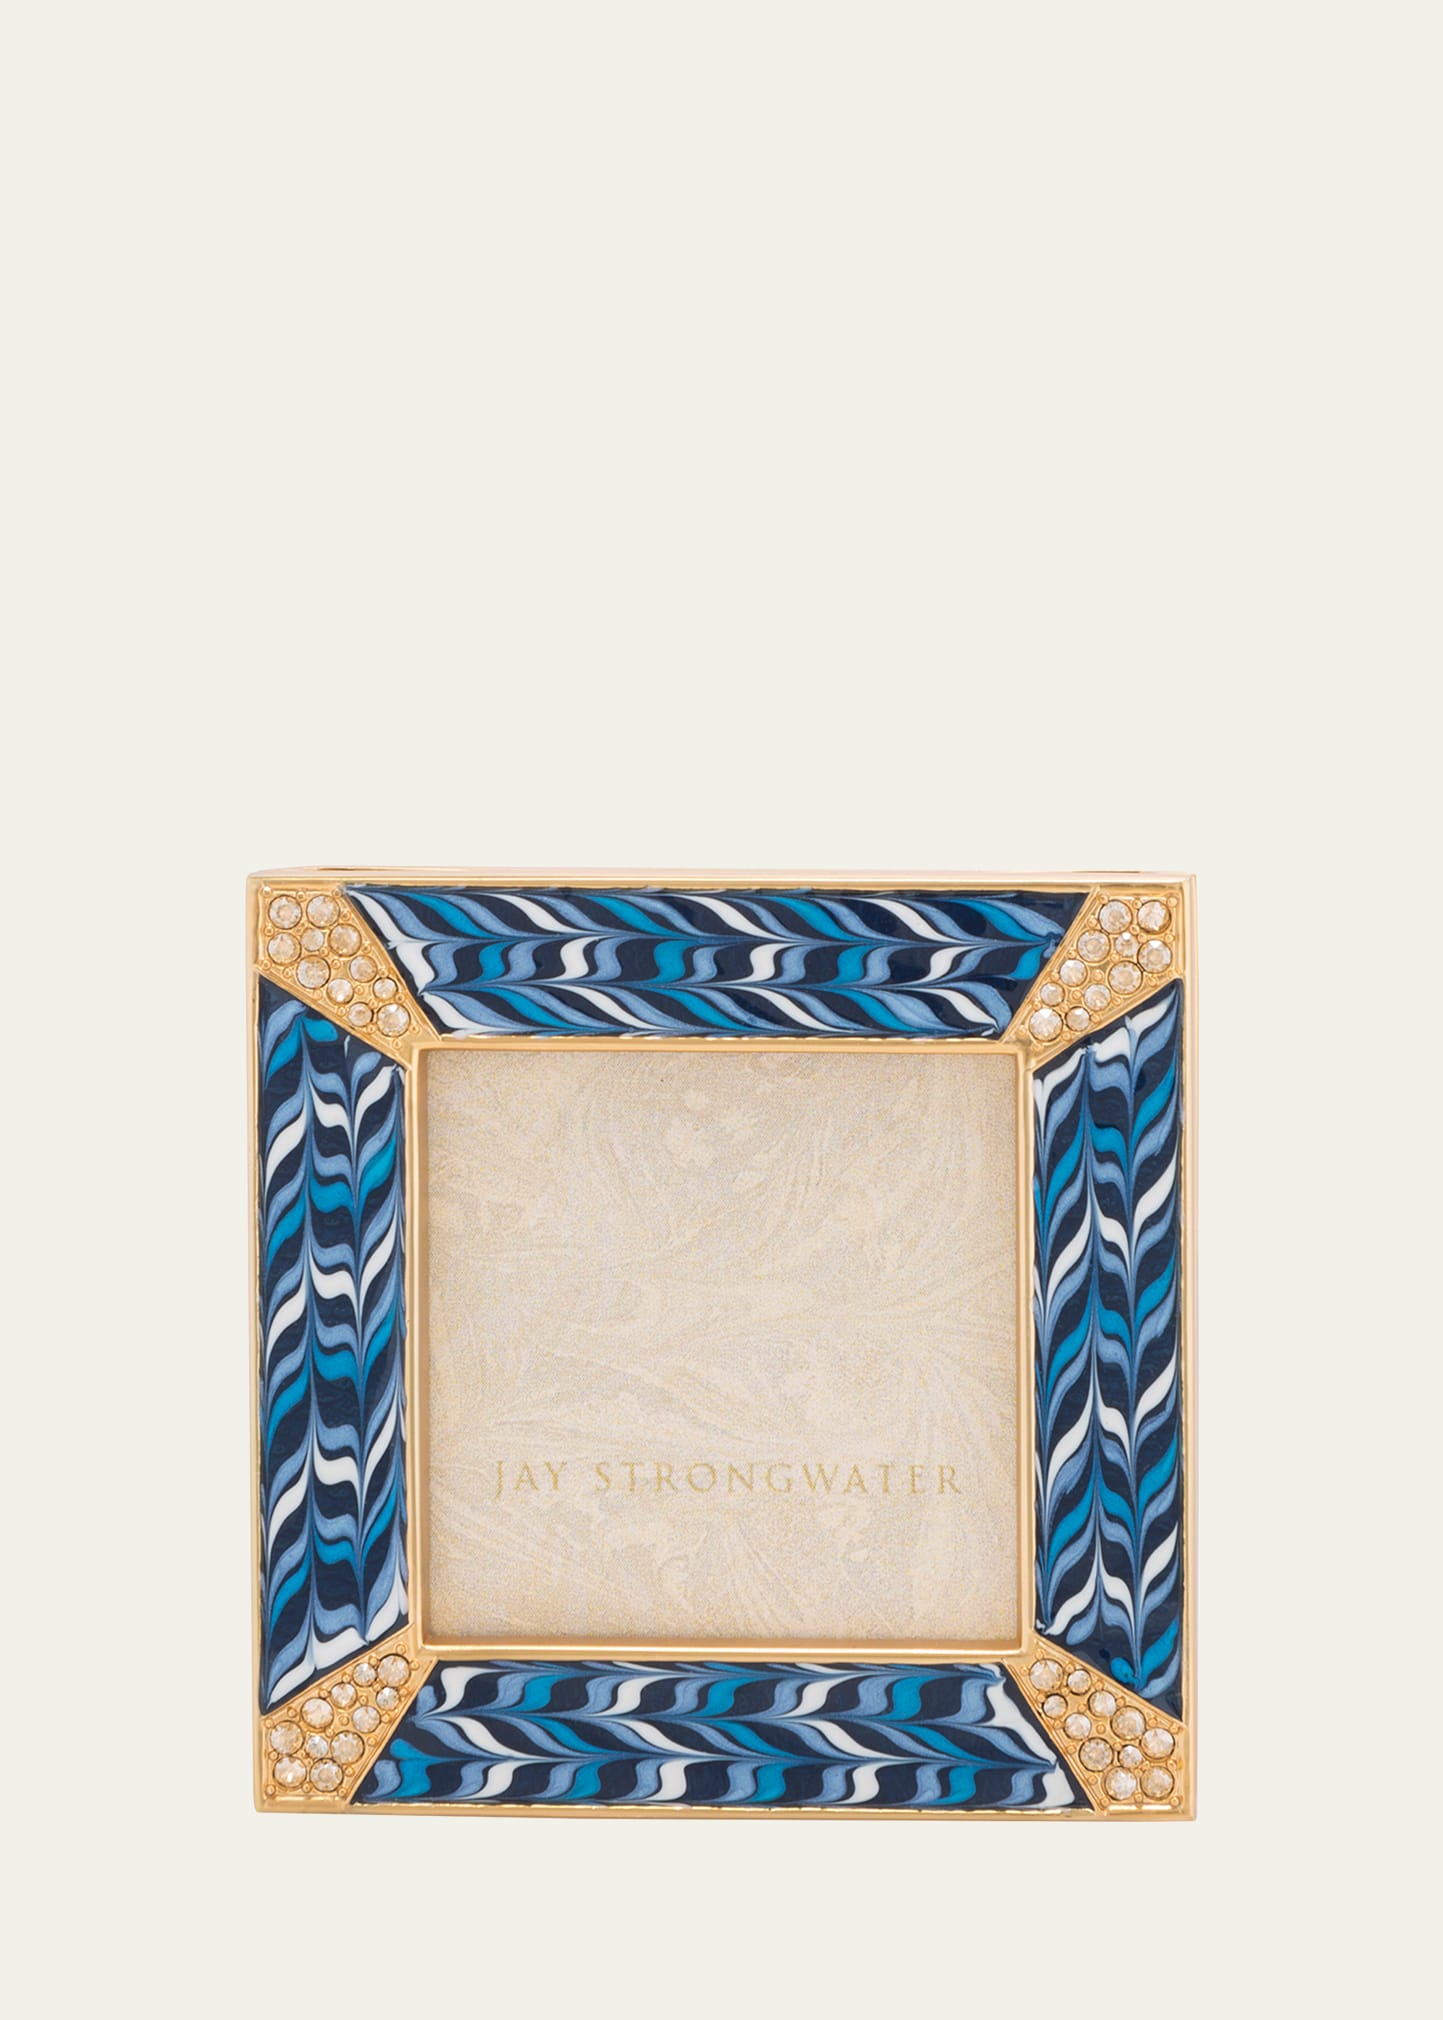 JAY STRONGWATER PAVE CORNER 2" SQUARE PICTURE FRAME, INDIGO